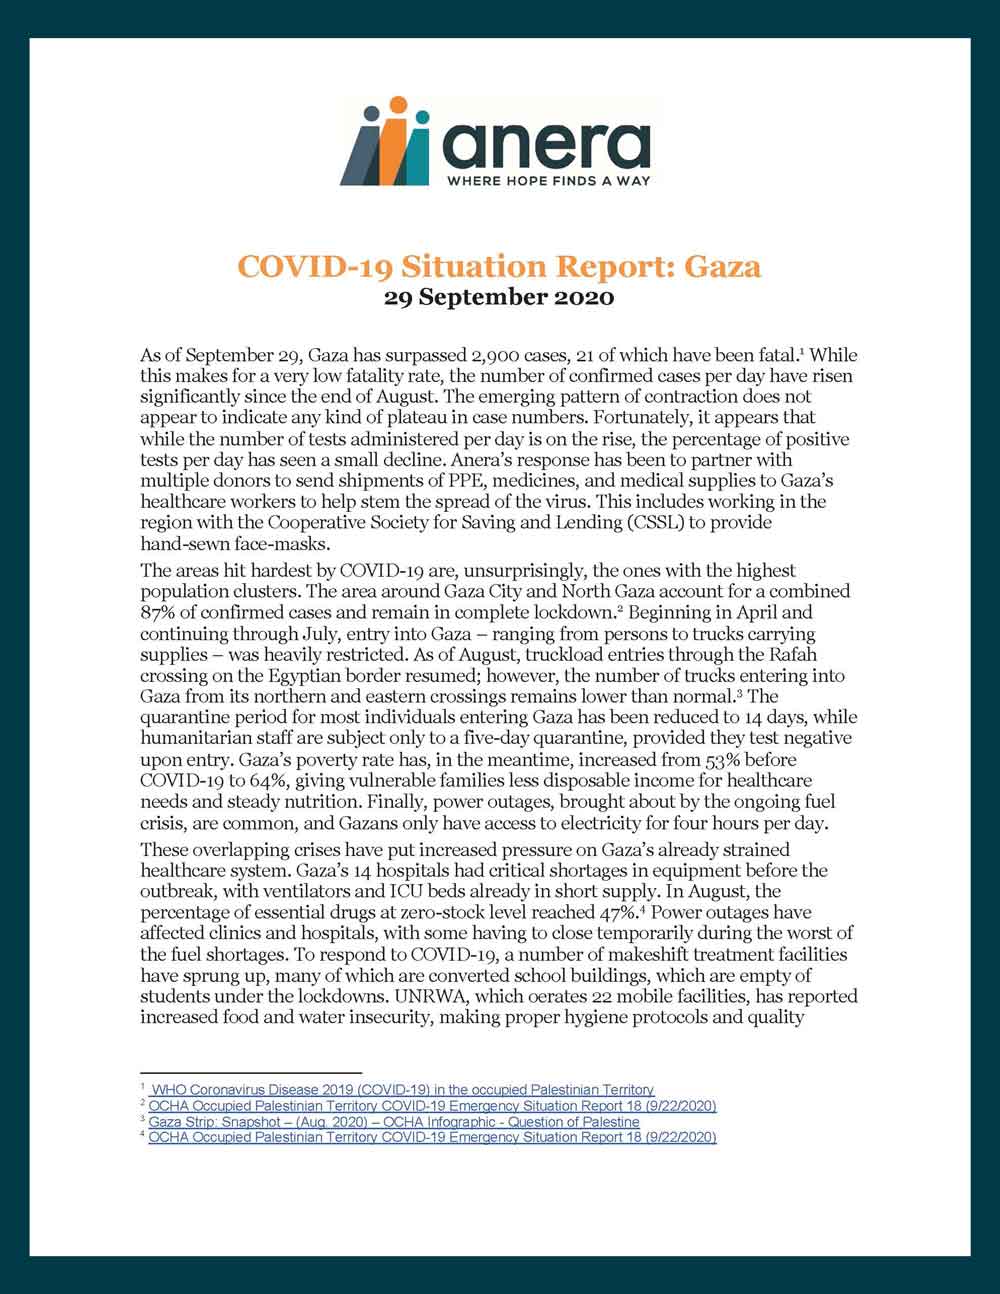 Anera's September situation report on COVID-19 in Gaza.